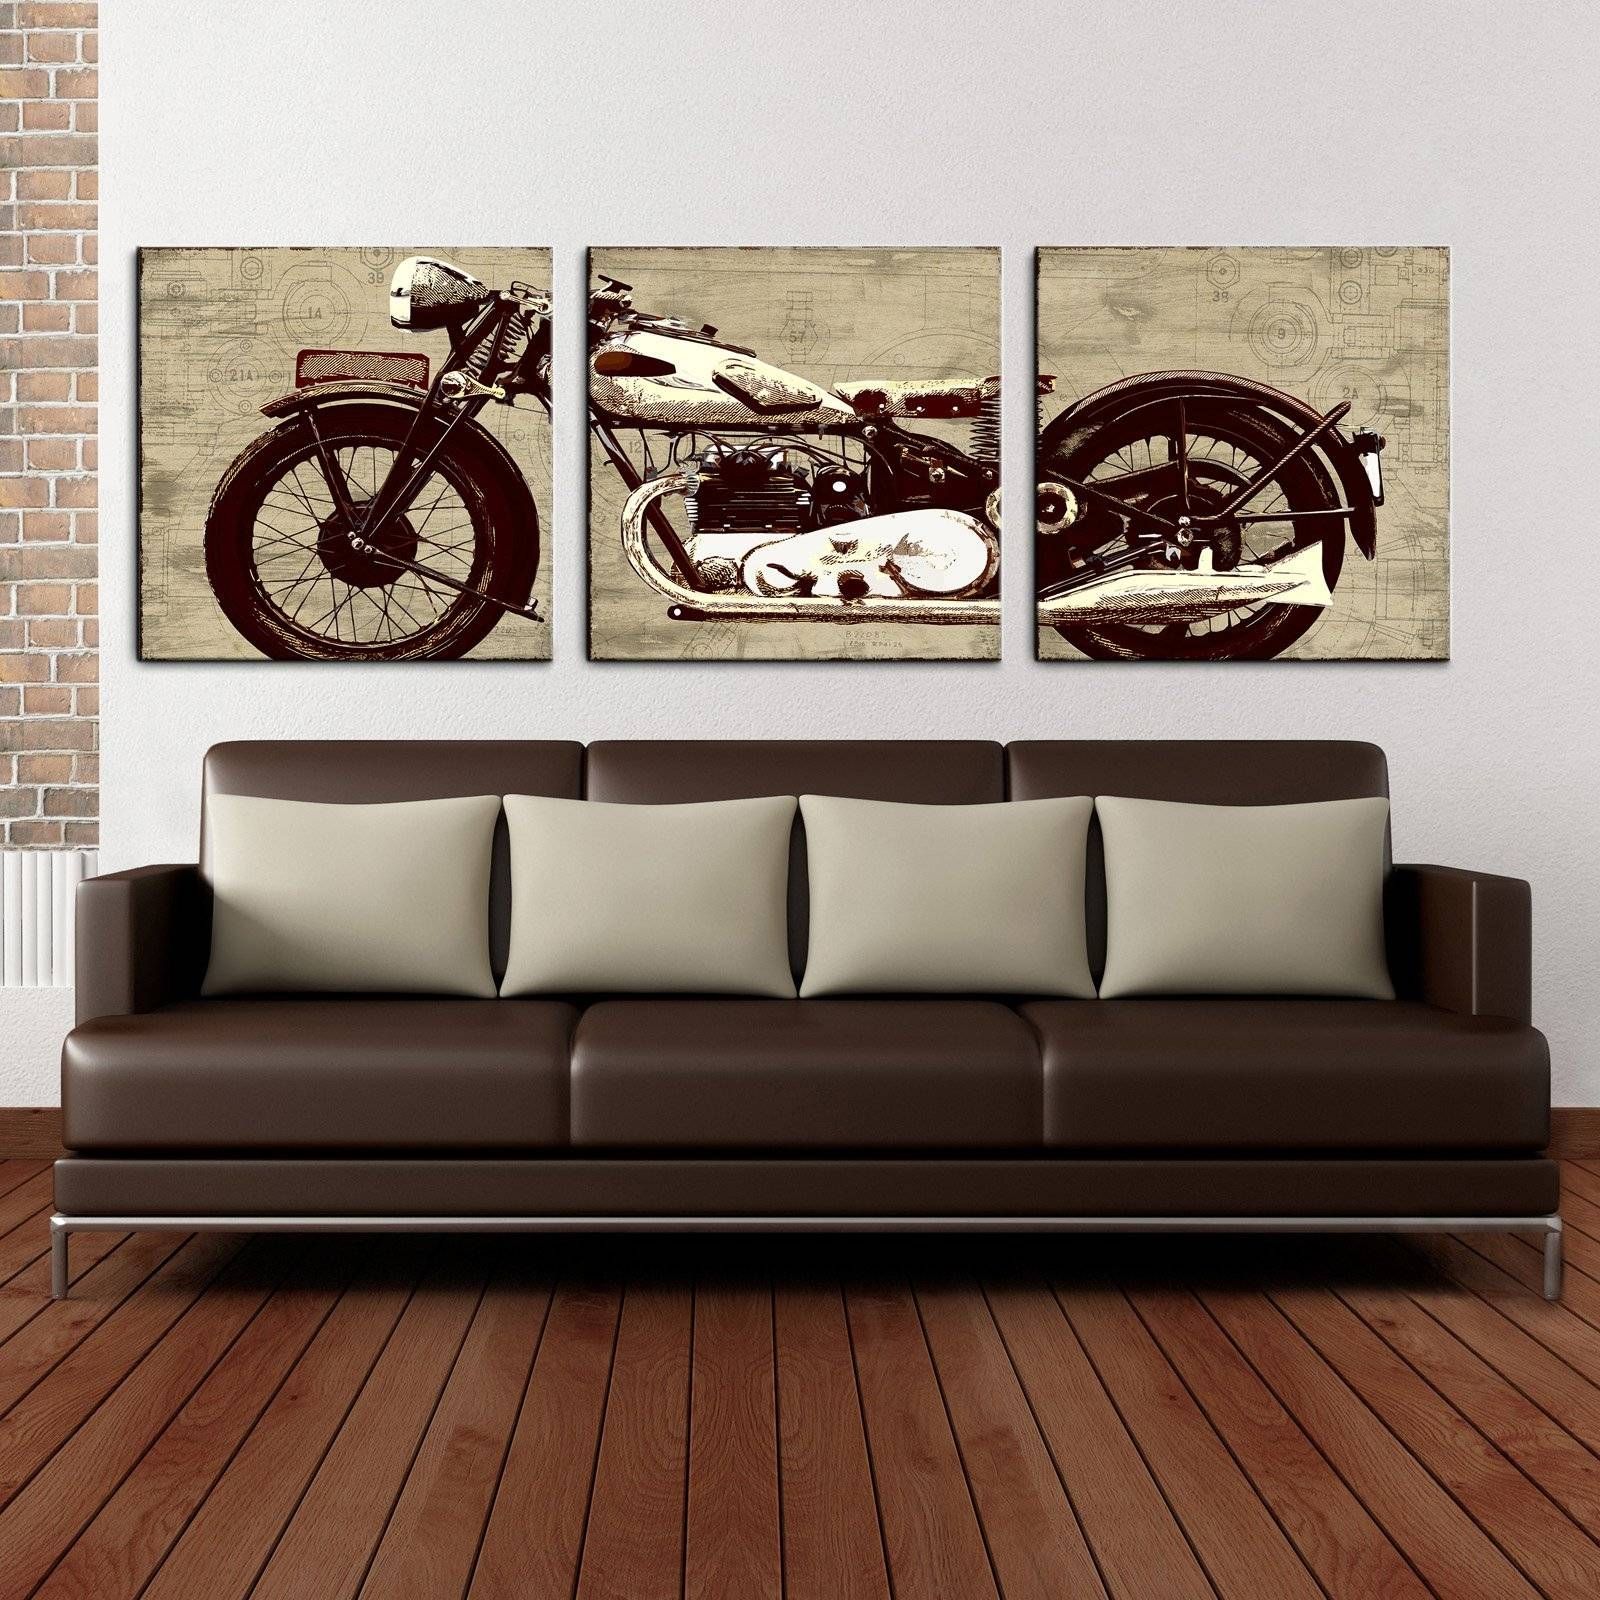 Motorcycle 24 X 72 Canvas Art Print Triptych | Hayneedle For Current Triptych Art For Sale (Gallery 19 of 20)